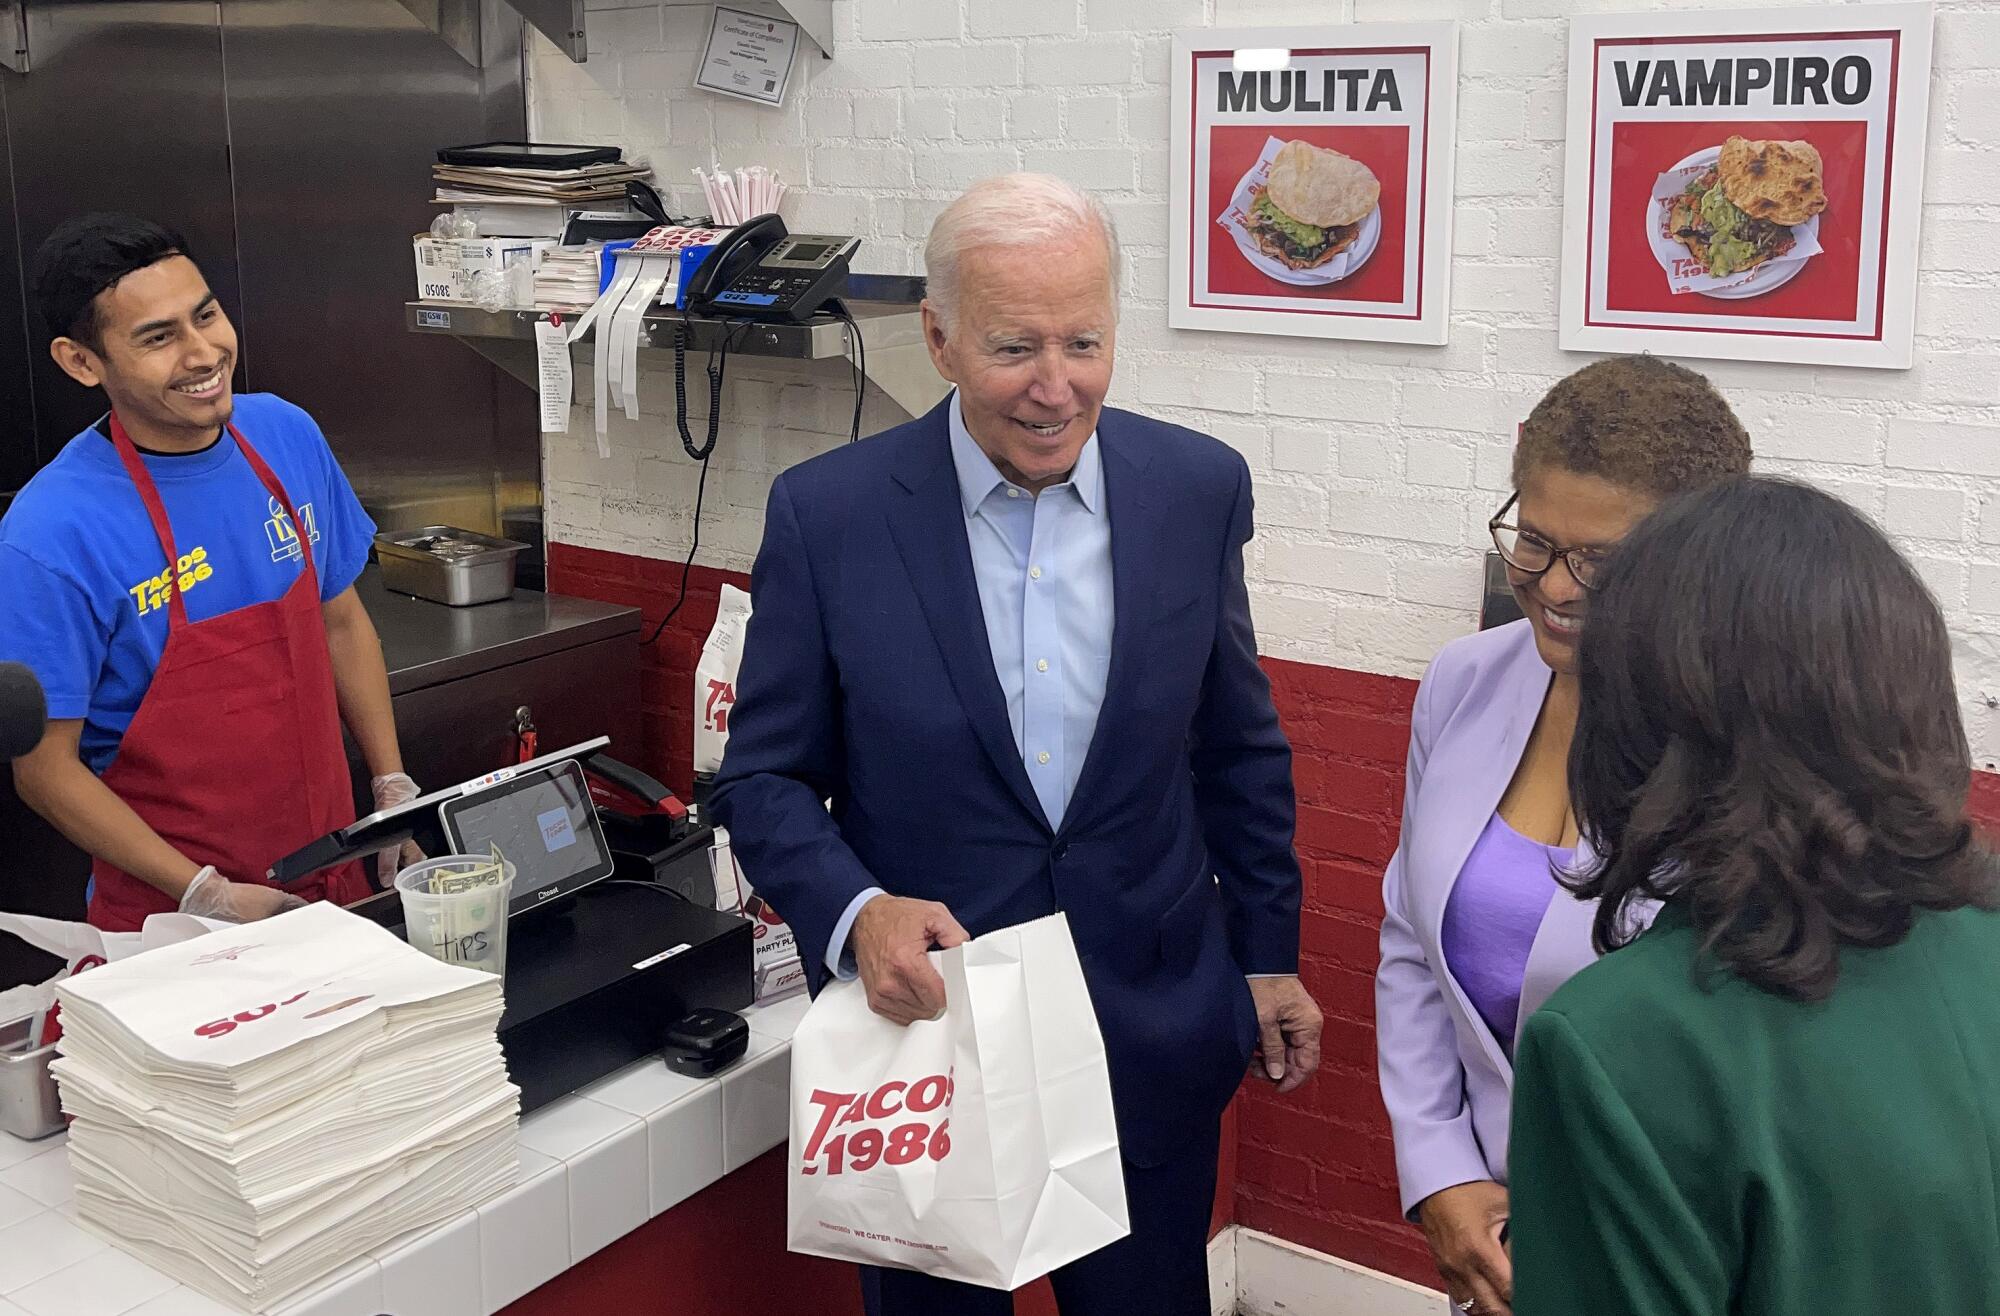 President Joe Biden carries a white bag that says Tacos 1986 as people look on smiling.